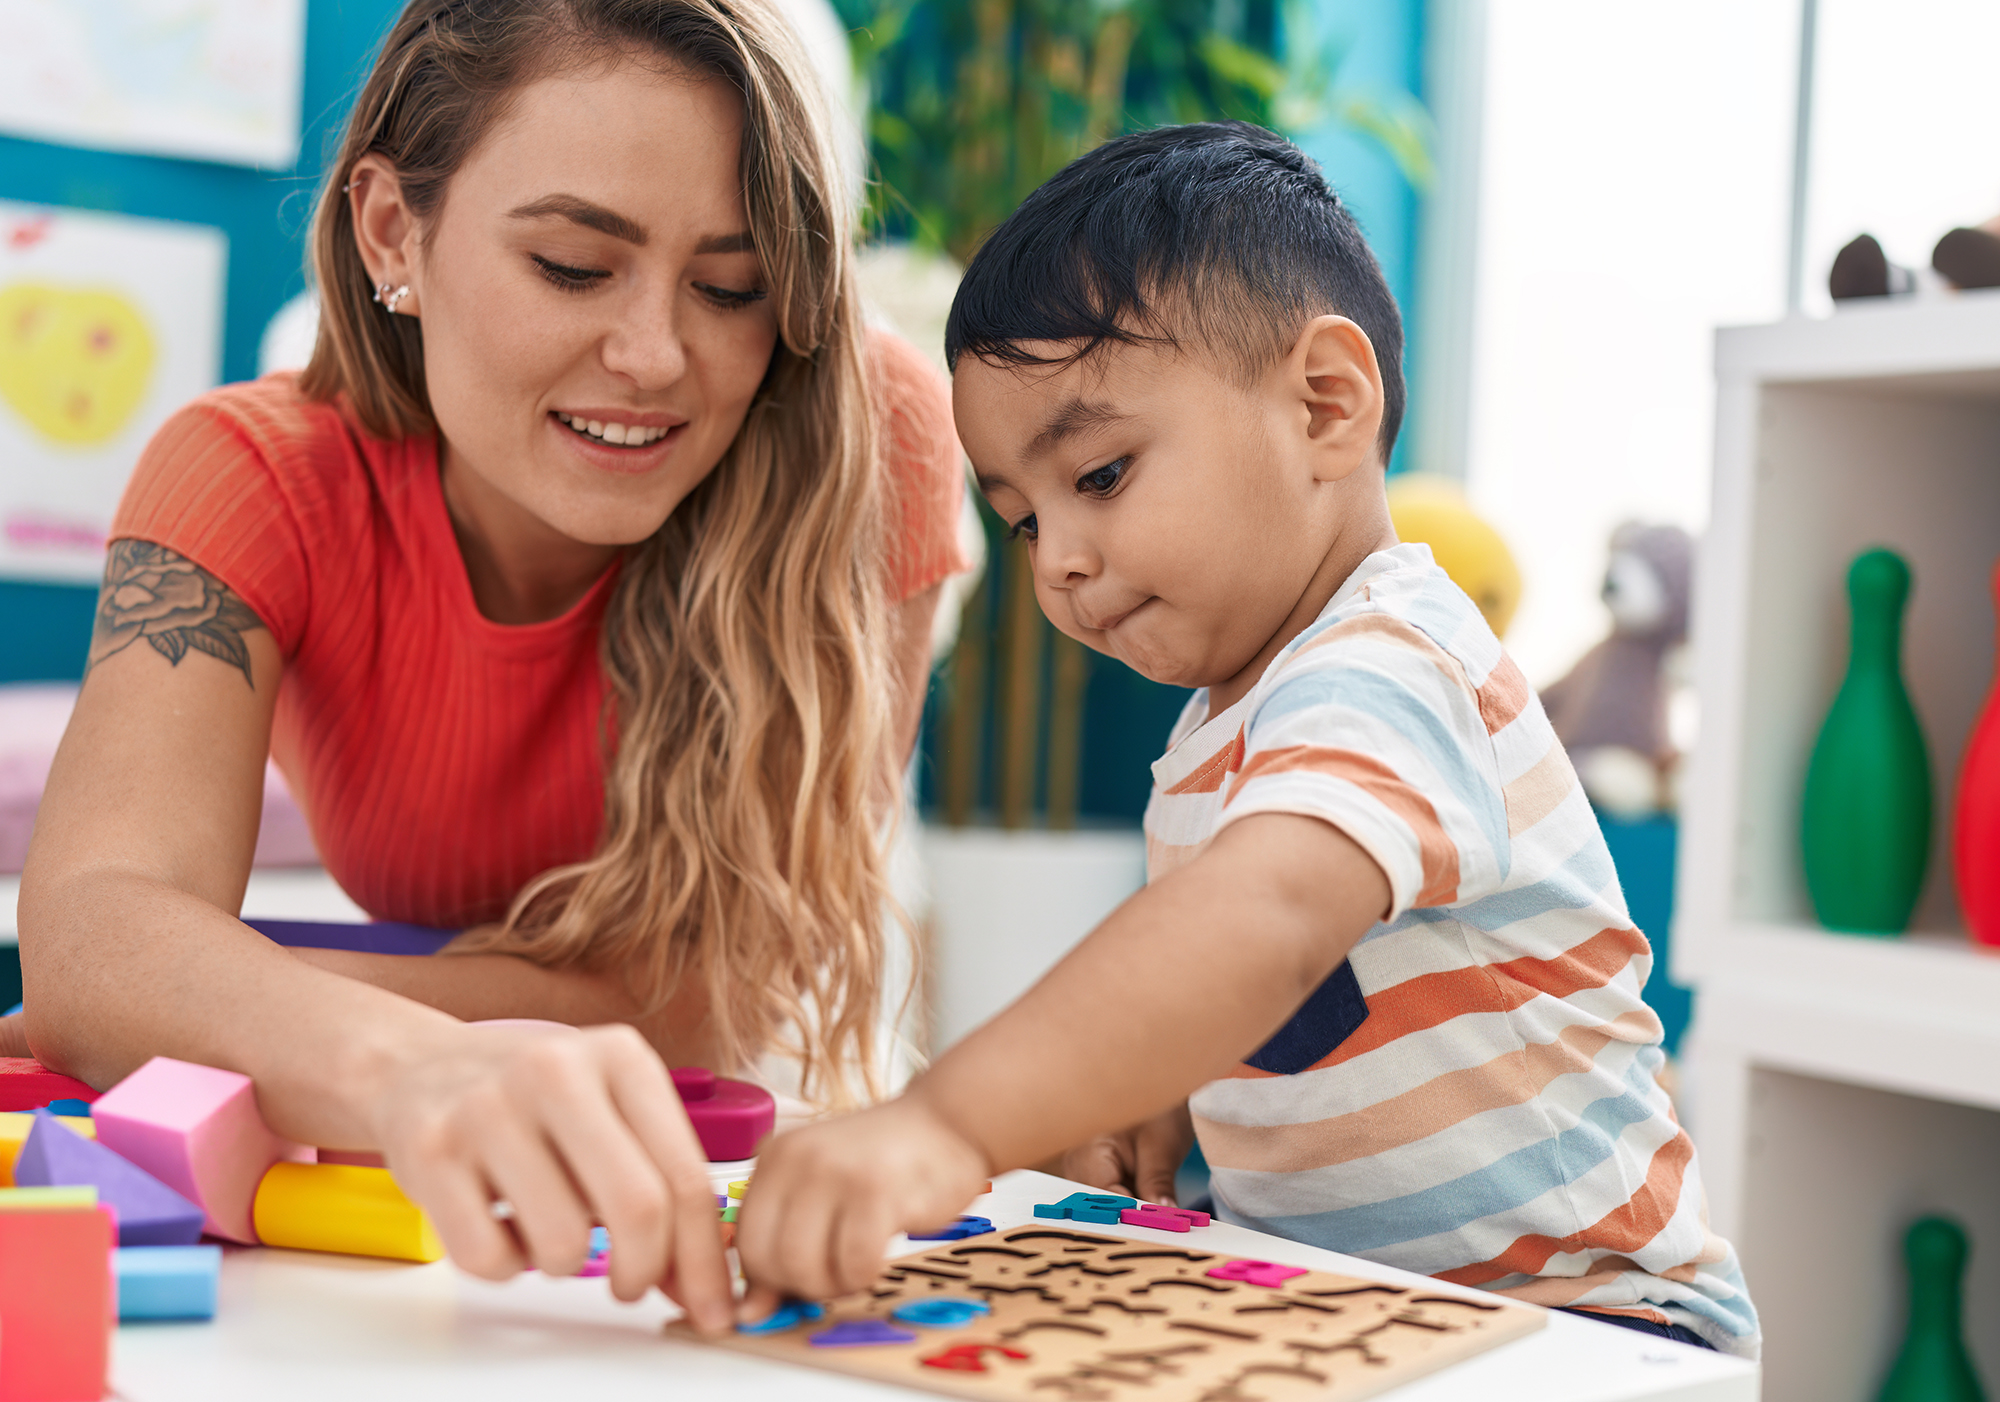 "A woman interacts with a young child while putting a puzzle together in a classroom setting"